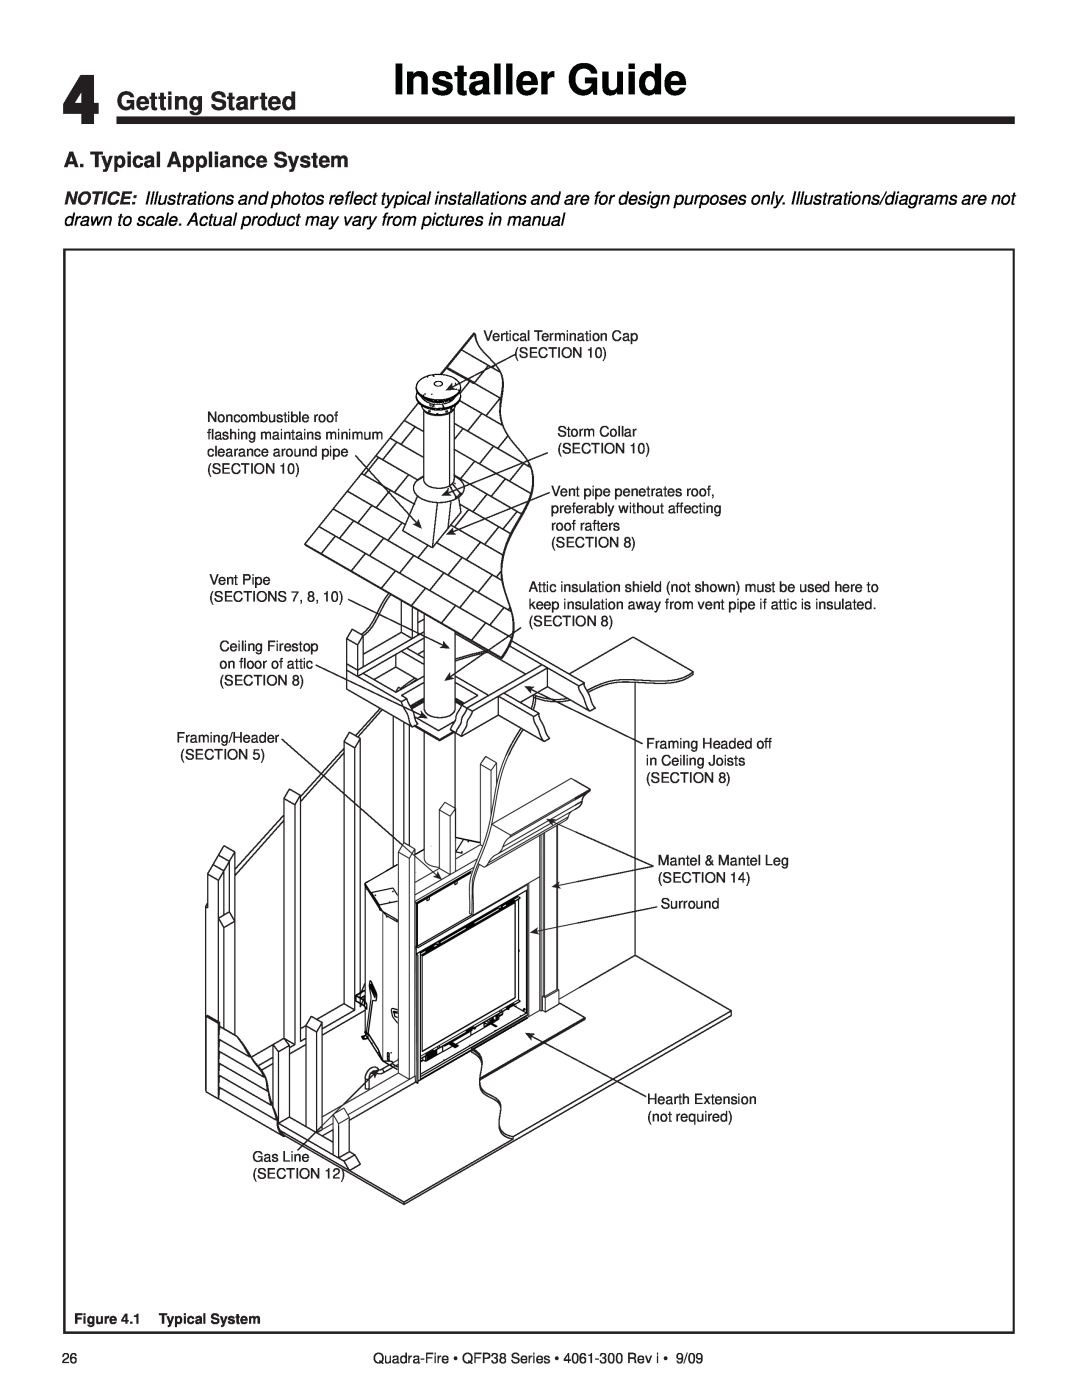 Quadra-Fire QFP38-NG Installer Guide, Getting Started, A. Typical Appliance System, Section, Framing/Header, Surround 